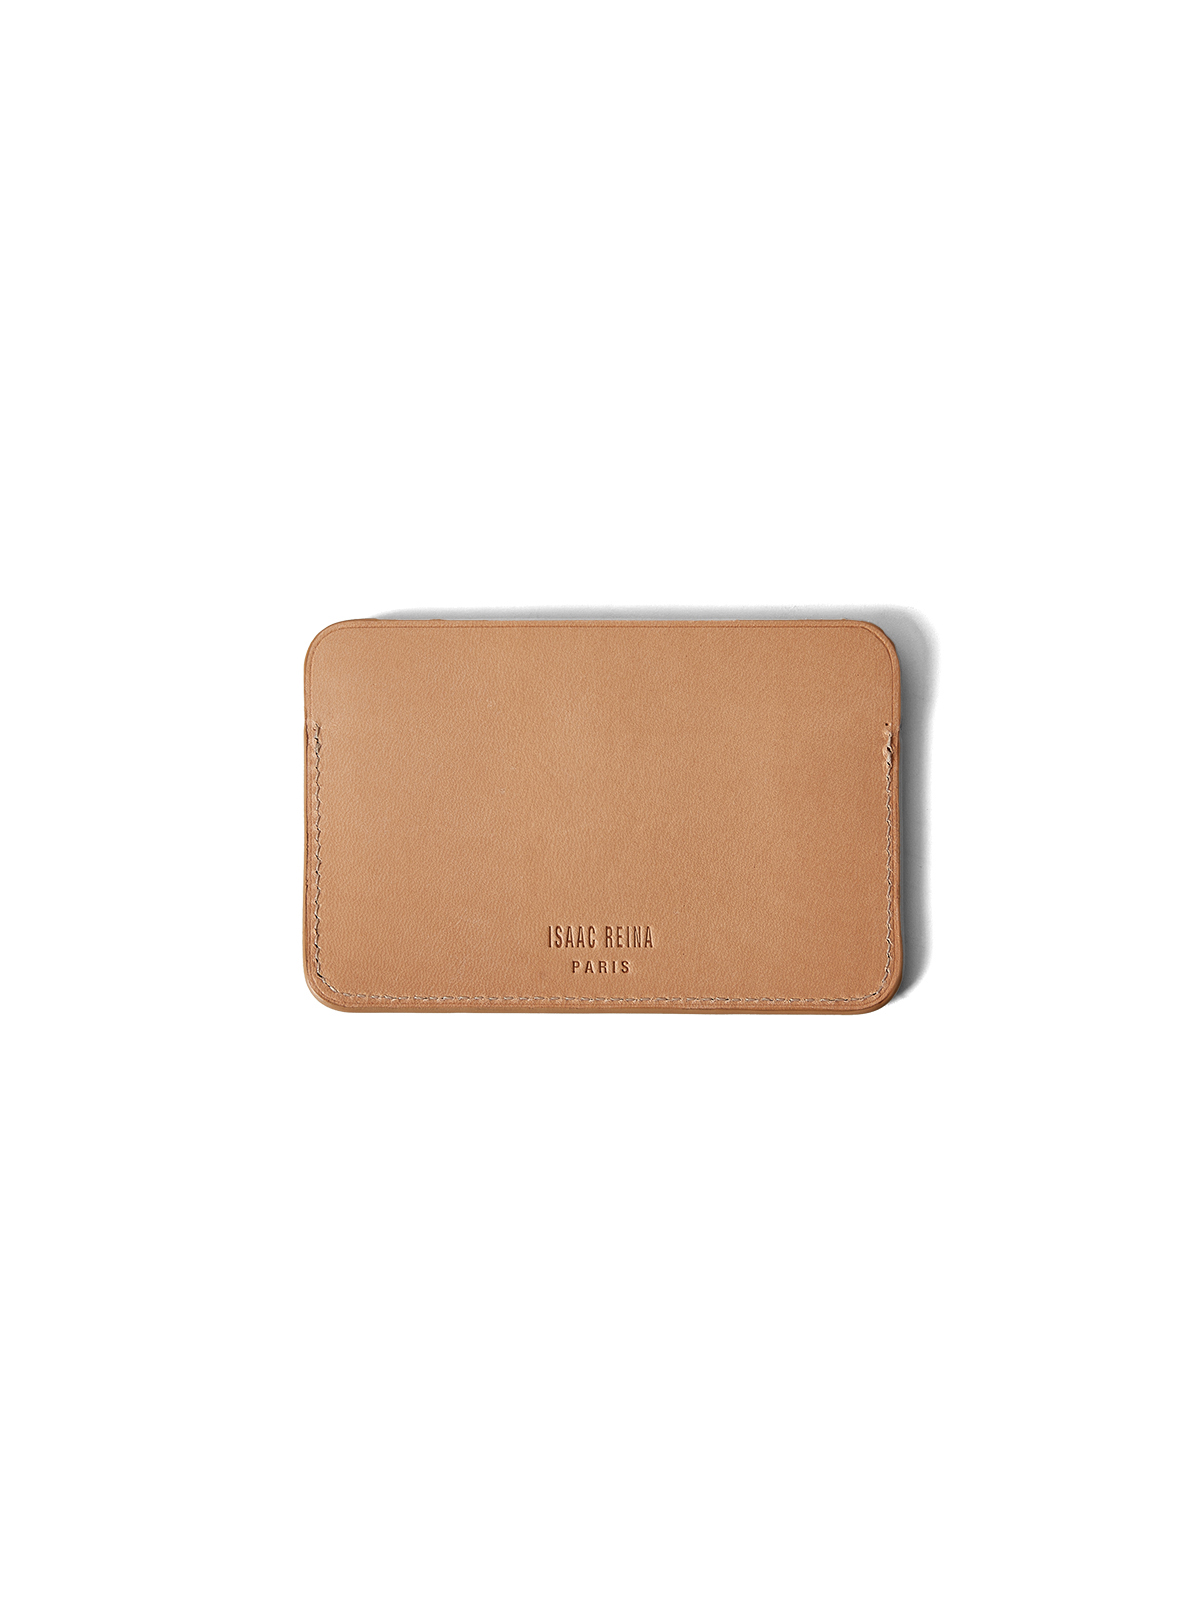 CARD HOLDER CLASSIFY (NATURAL)